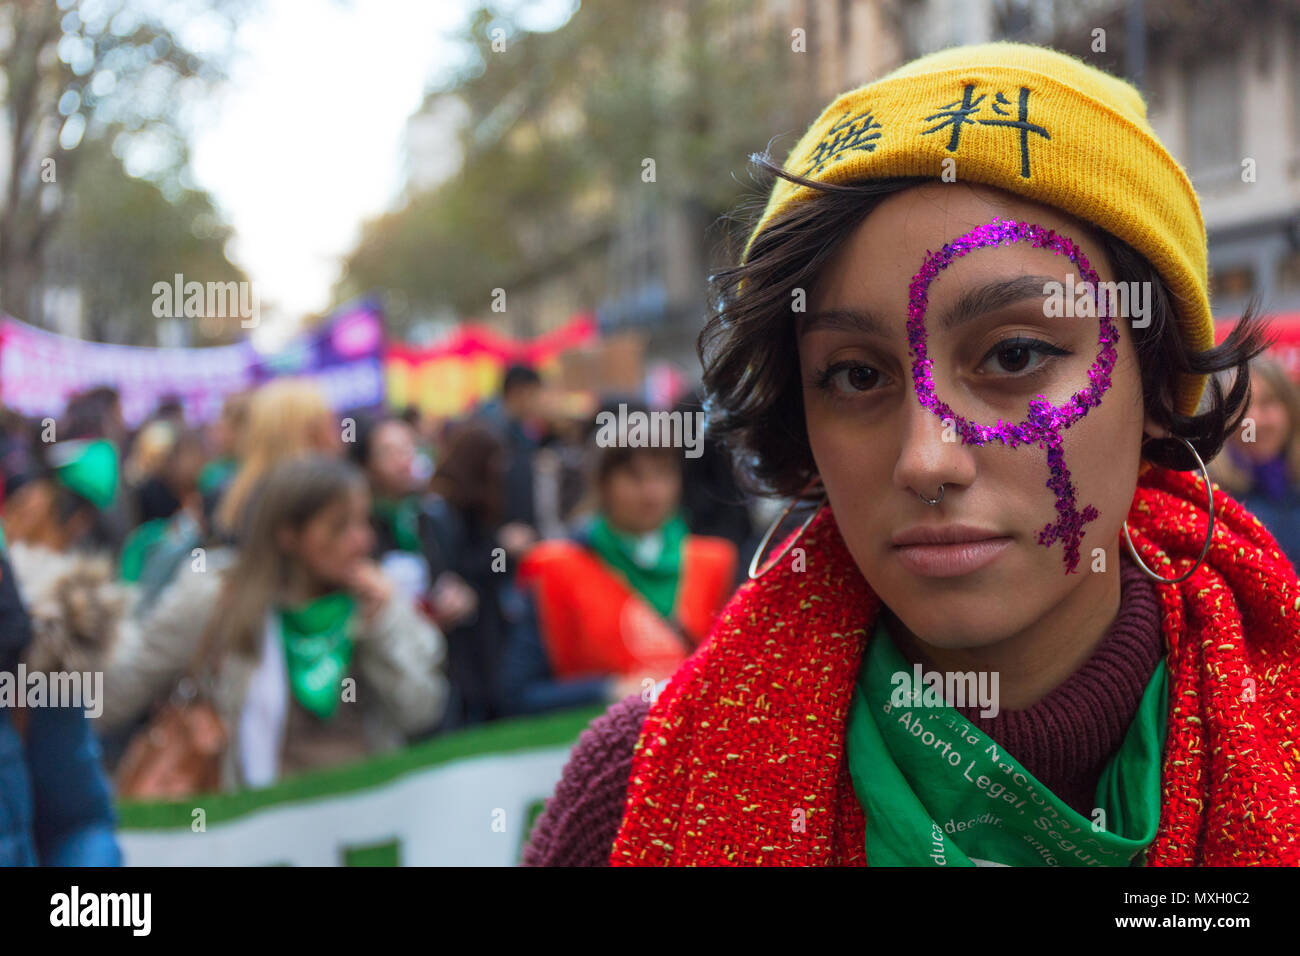 Buenos Aires, Argentina. 4th Jun, 2018. Portrait of a young girl participating in the march 'Ni una menos' (Not one less) against sexist violence and claim for decriminalisation of abortion in Buenos Aires (Argentina) on June 4, 2018. Credit: Nicholas Tinelli/Alamy Live News Stock Photo